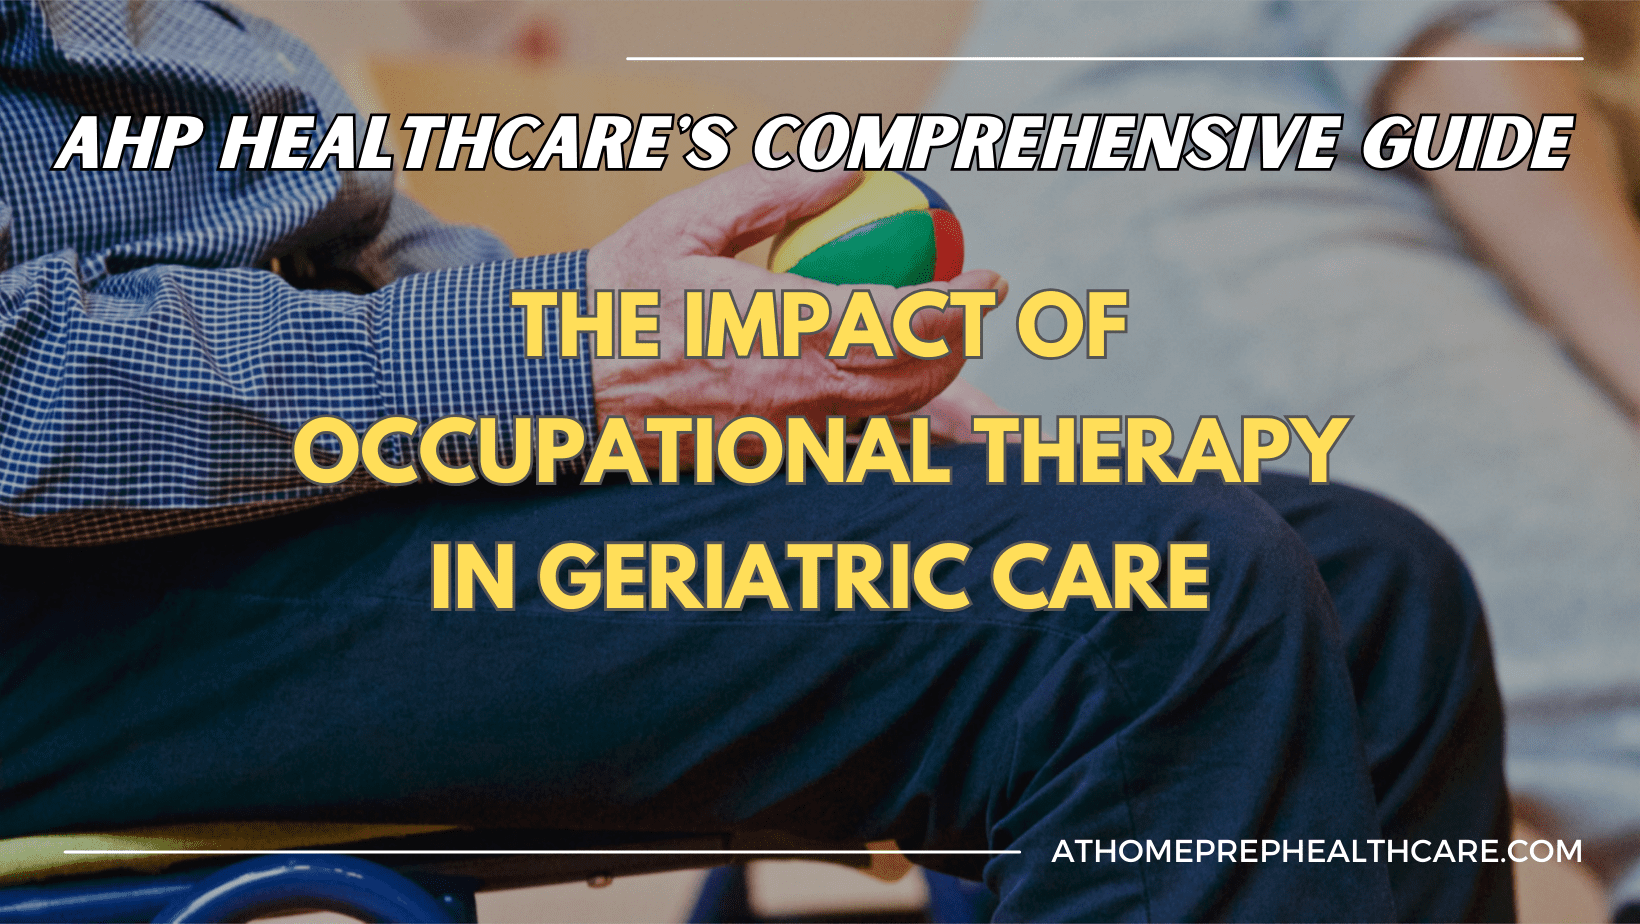 The Impact of Occupational Therapy in Geriatric Care